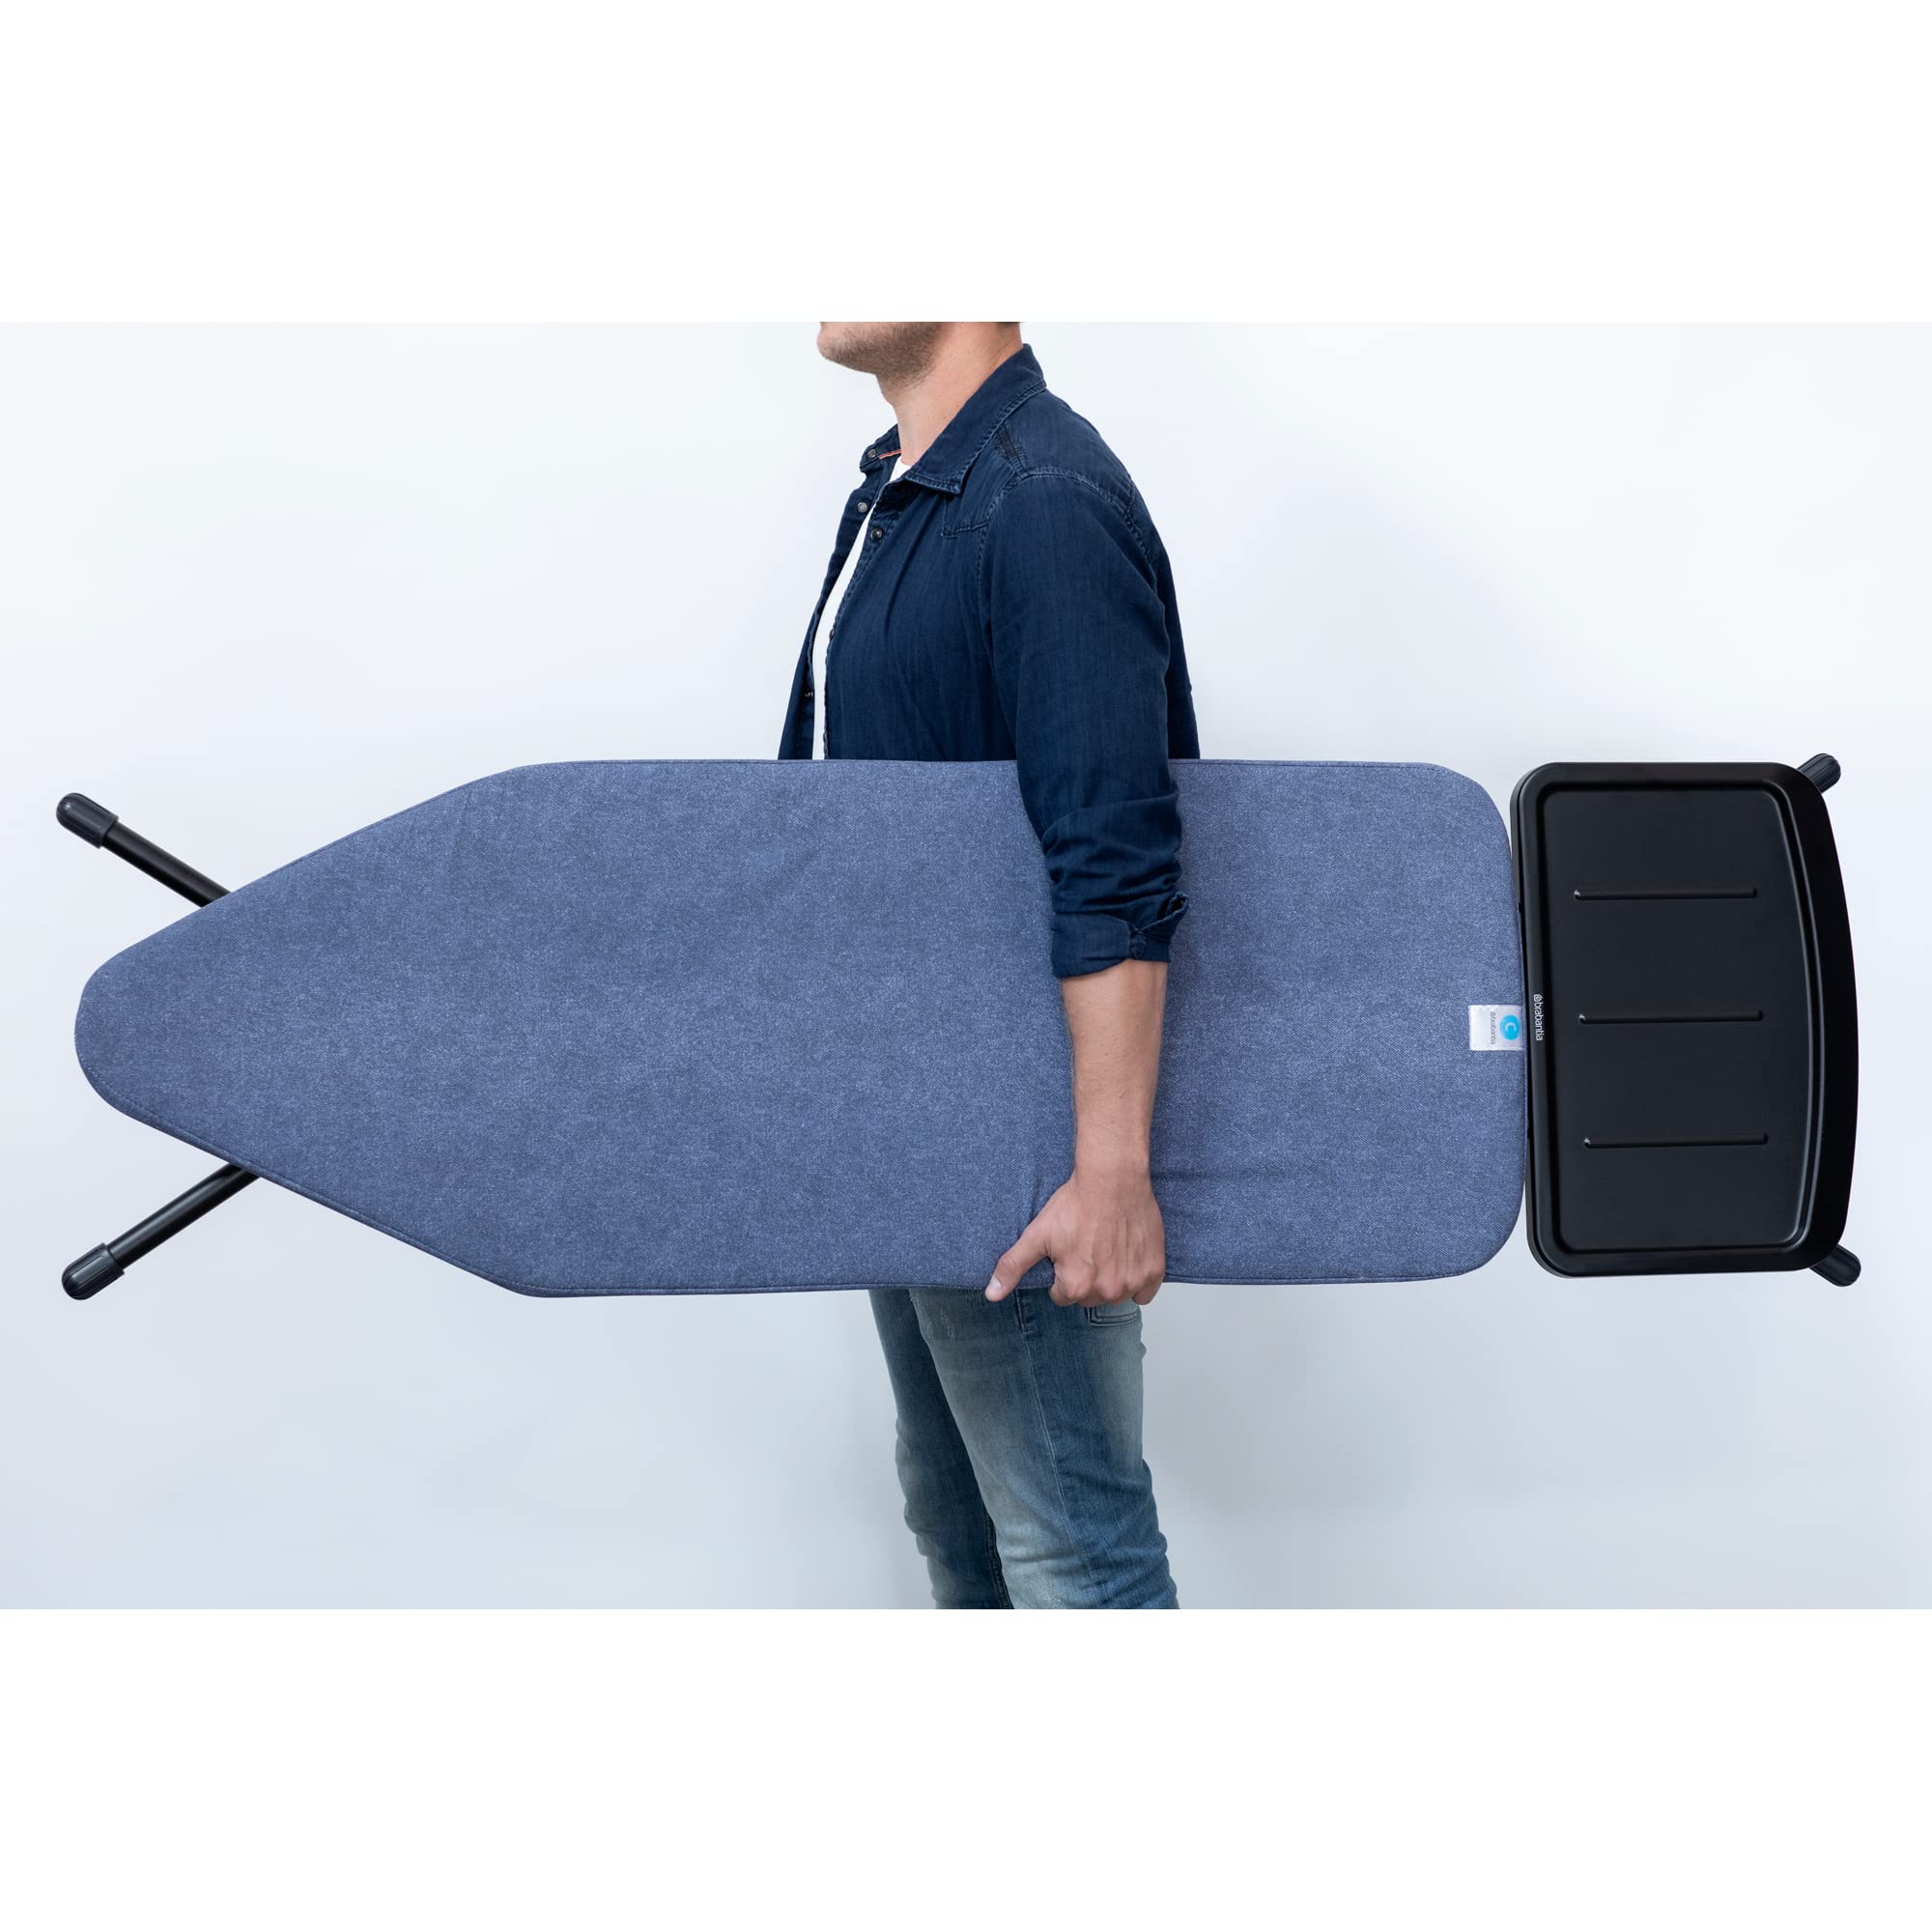 Brabantia - Ironing Board C - Extra Large Steam Iron Rest - Adjustable in Height - Non-Slip Rubber Feet - Cotton Cover with Foam Layer - Foldable XL Unit - Denim Blue - 49 x 18 inches